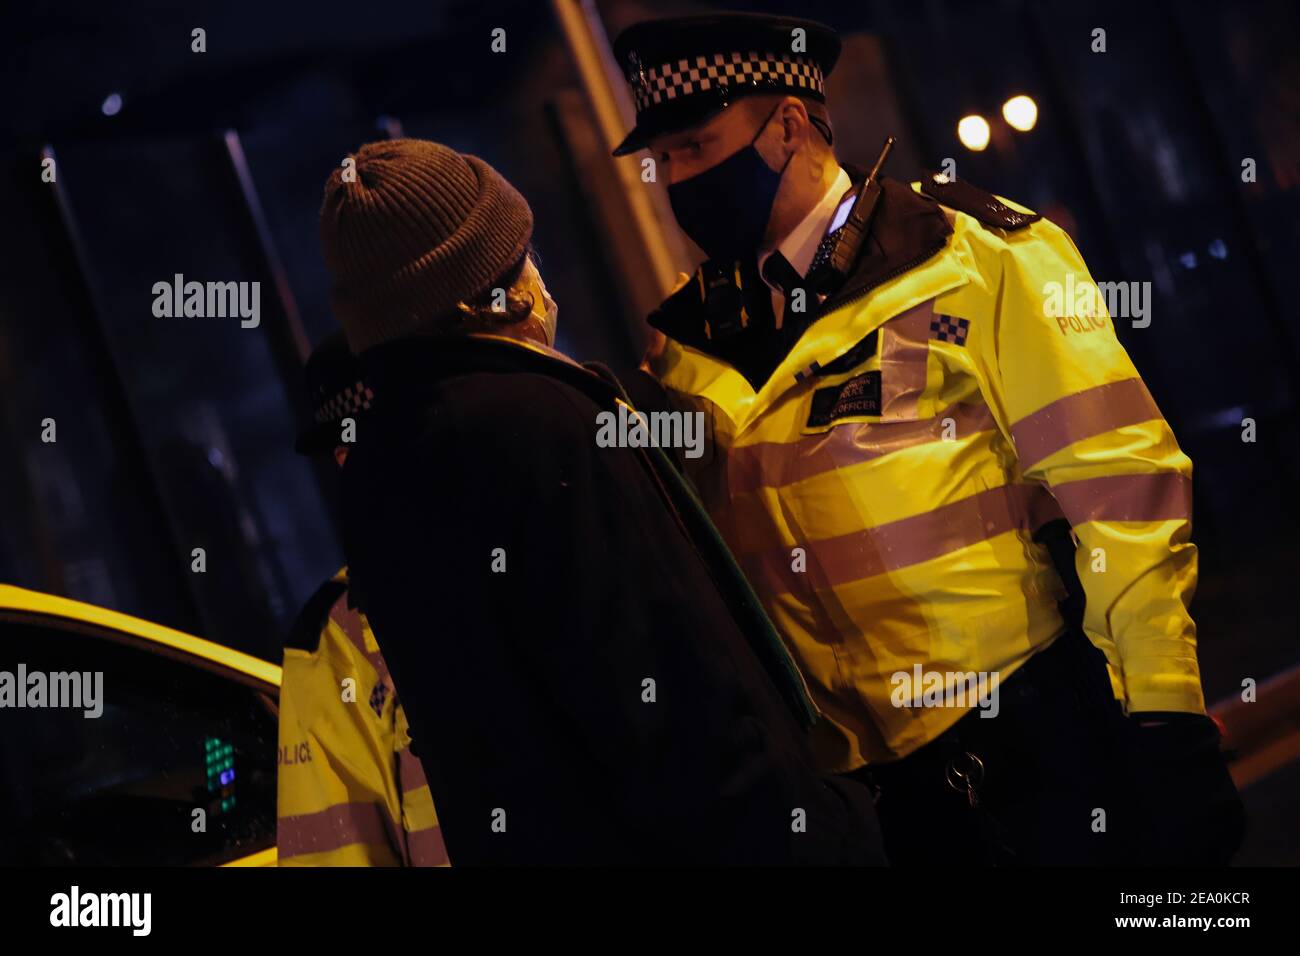 London, UK. 6th February, 2021. Candlelit vigil in remembrence of the lost trees at Euston Square, London as part of the Stop HS2 protest February 6th 2021. A police officer challenges a protestor Credit: Denise Laura Baker/Alamy Live News Stock Photo